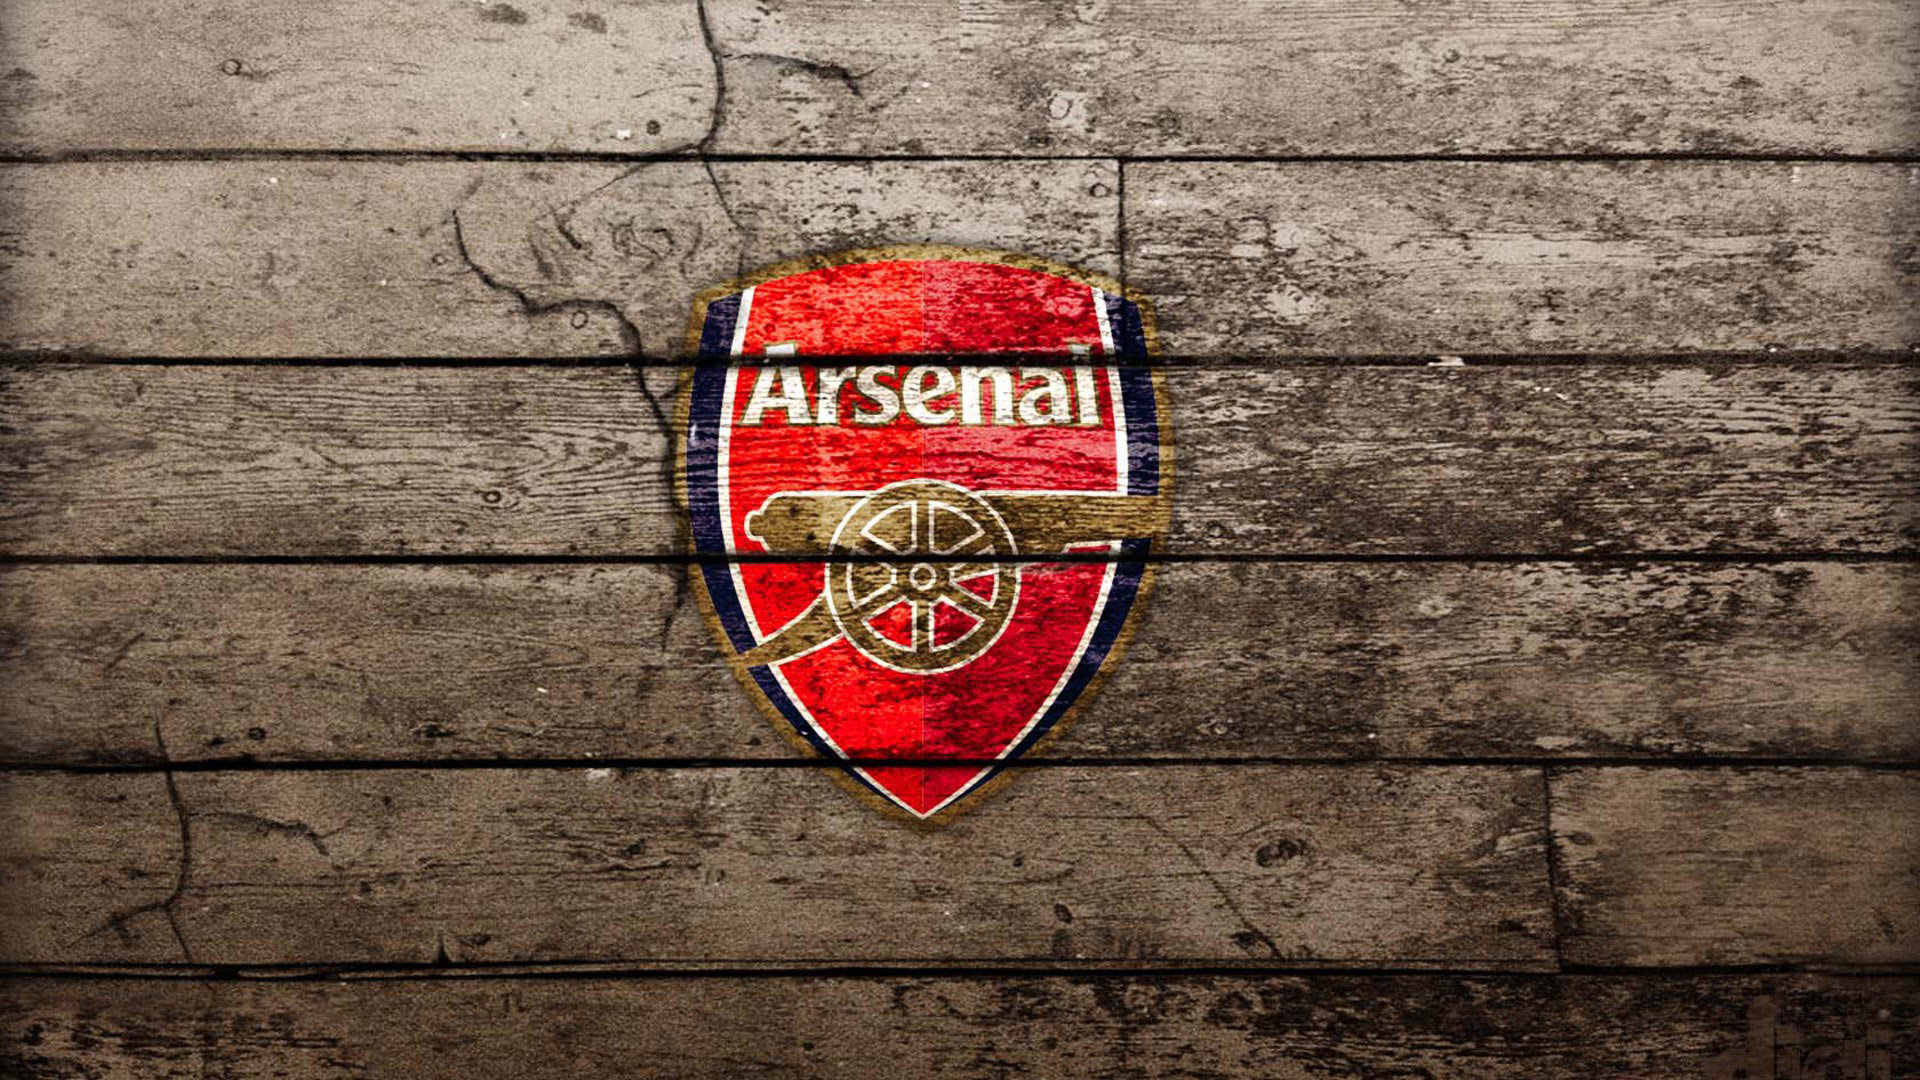 Download 1080p Arsenal F.C. PC wallpaper ID:444791 for free